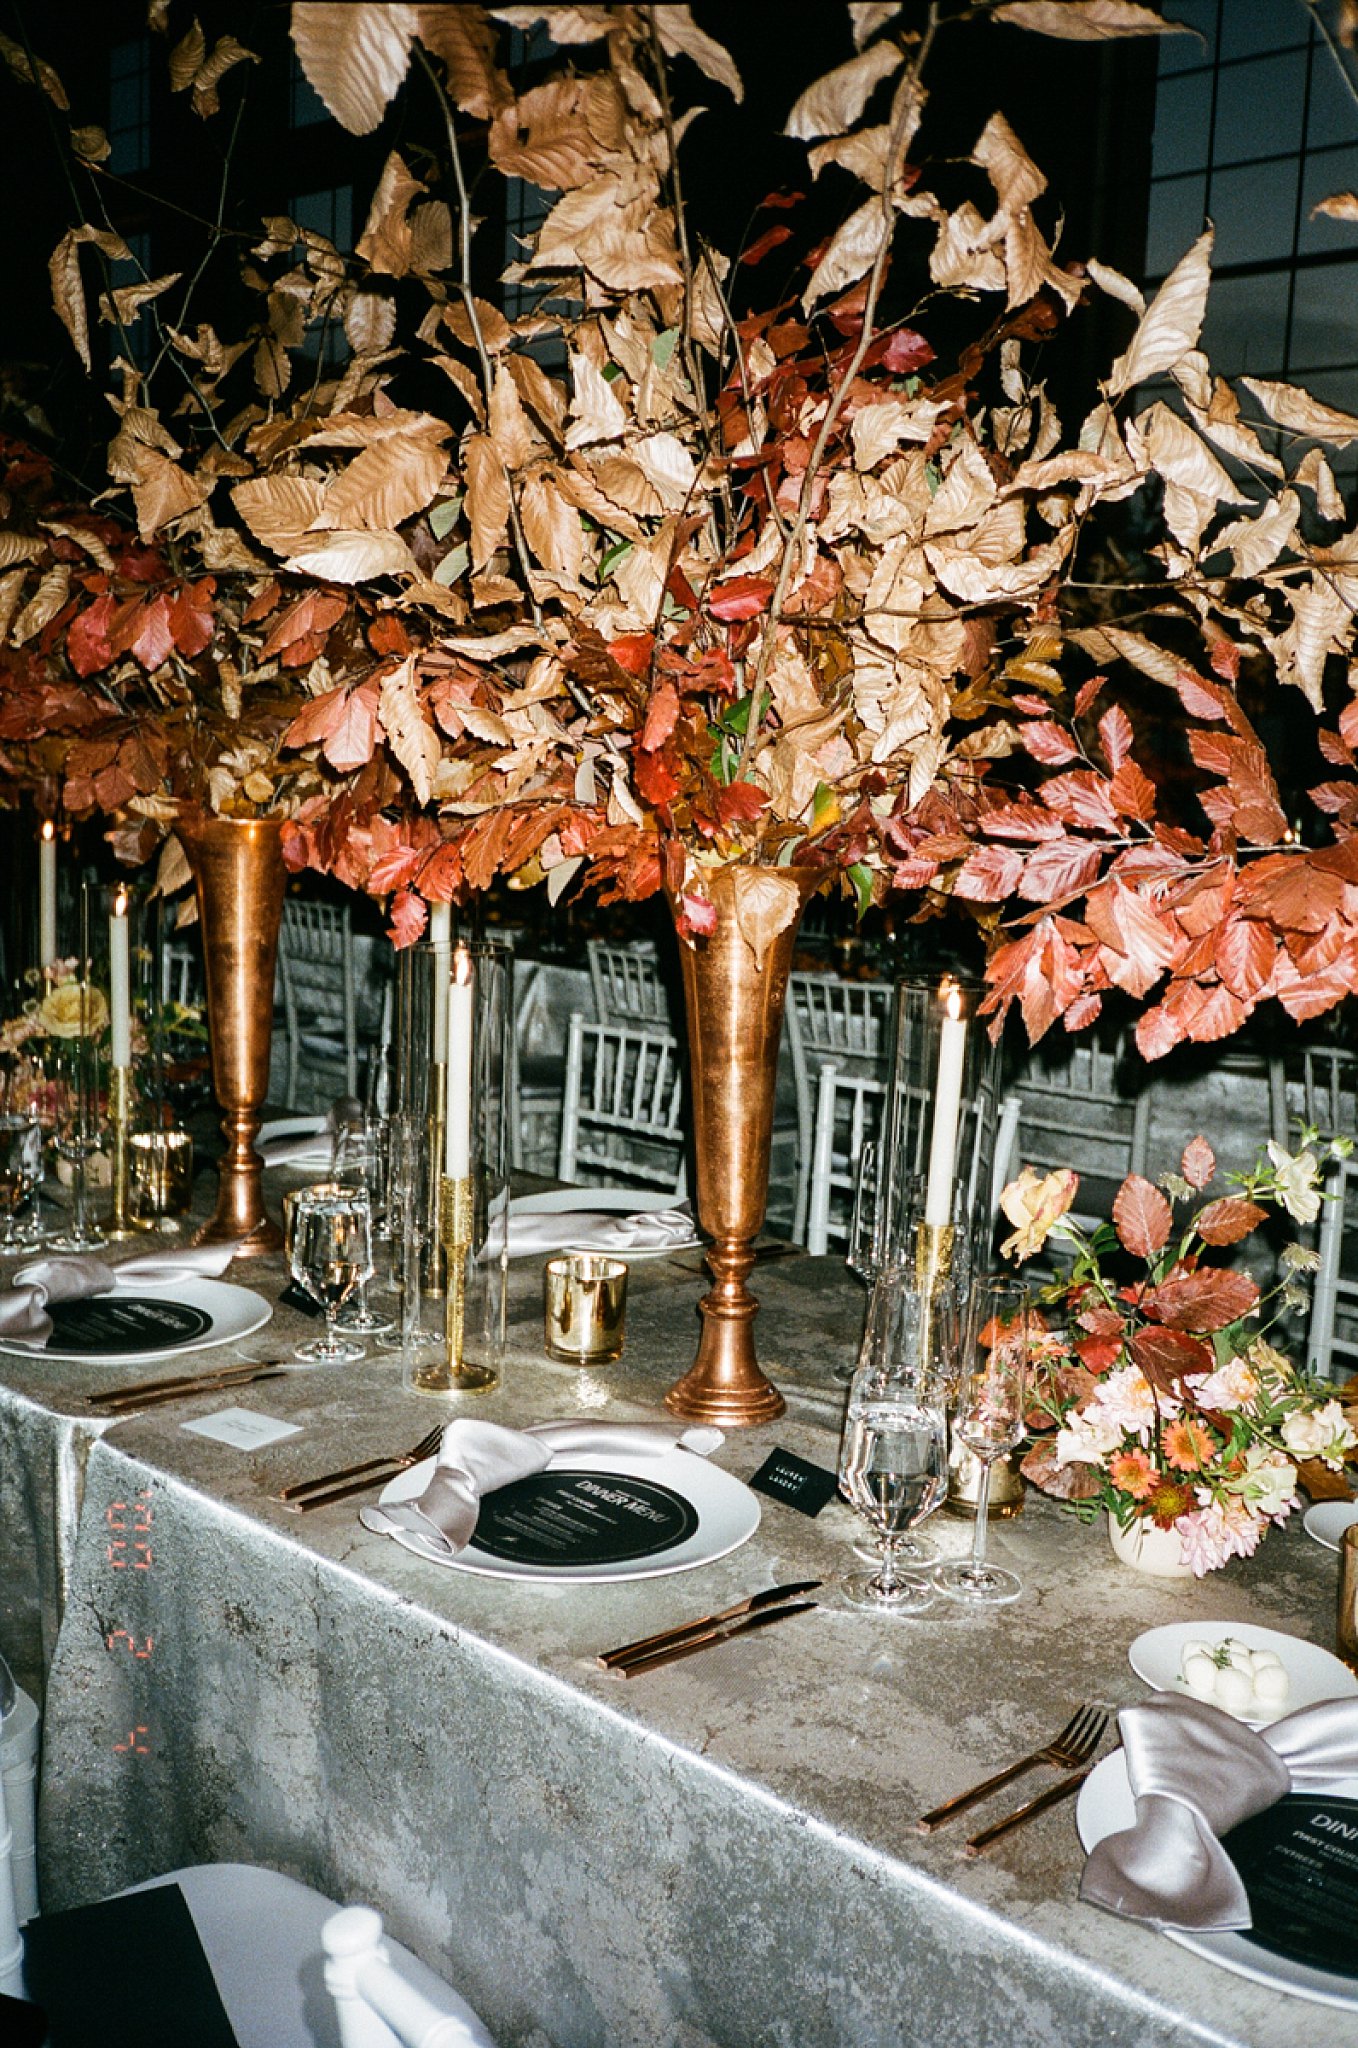 Details of a tablescape at an artistic Boston Wedding, long dinner table with place settings, flutes, glasses, candles and tall brass vases with leaves.